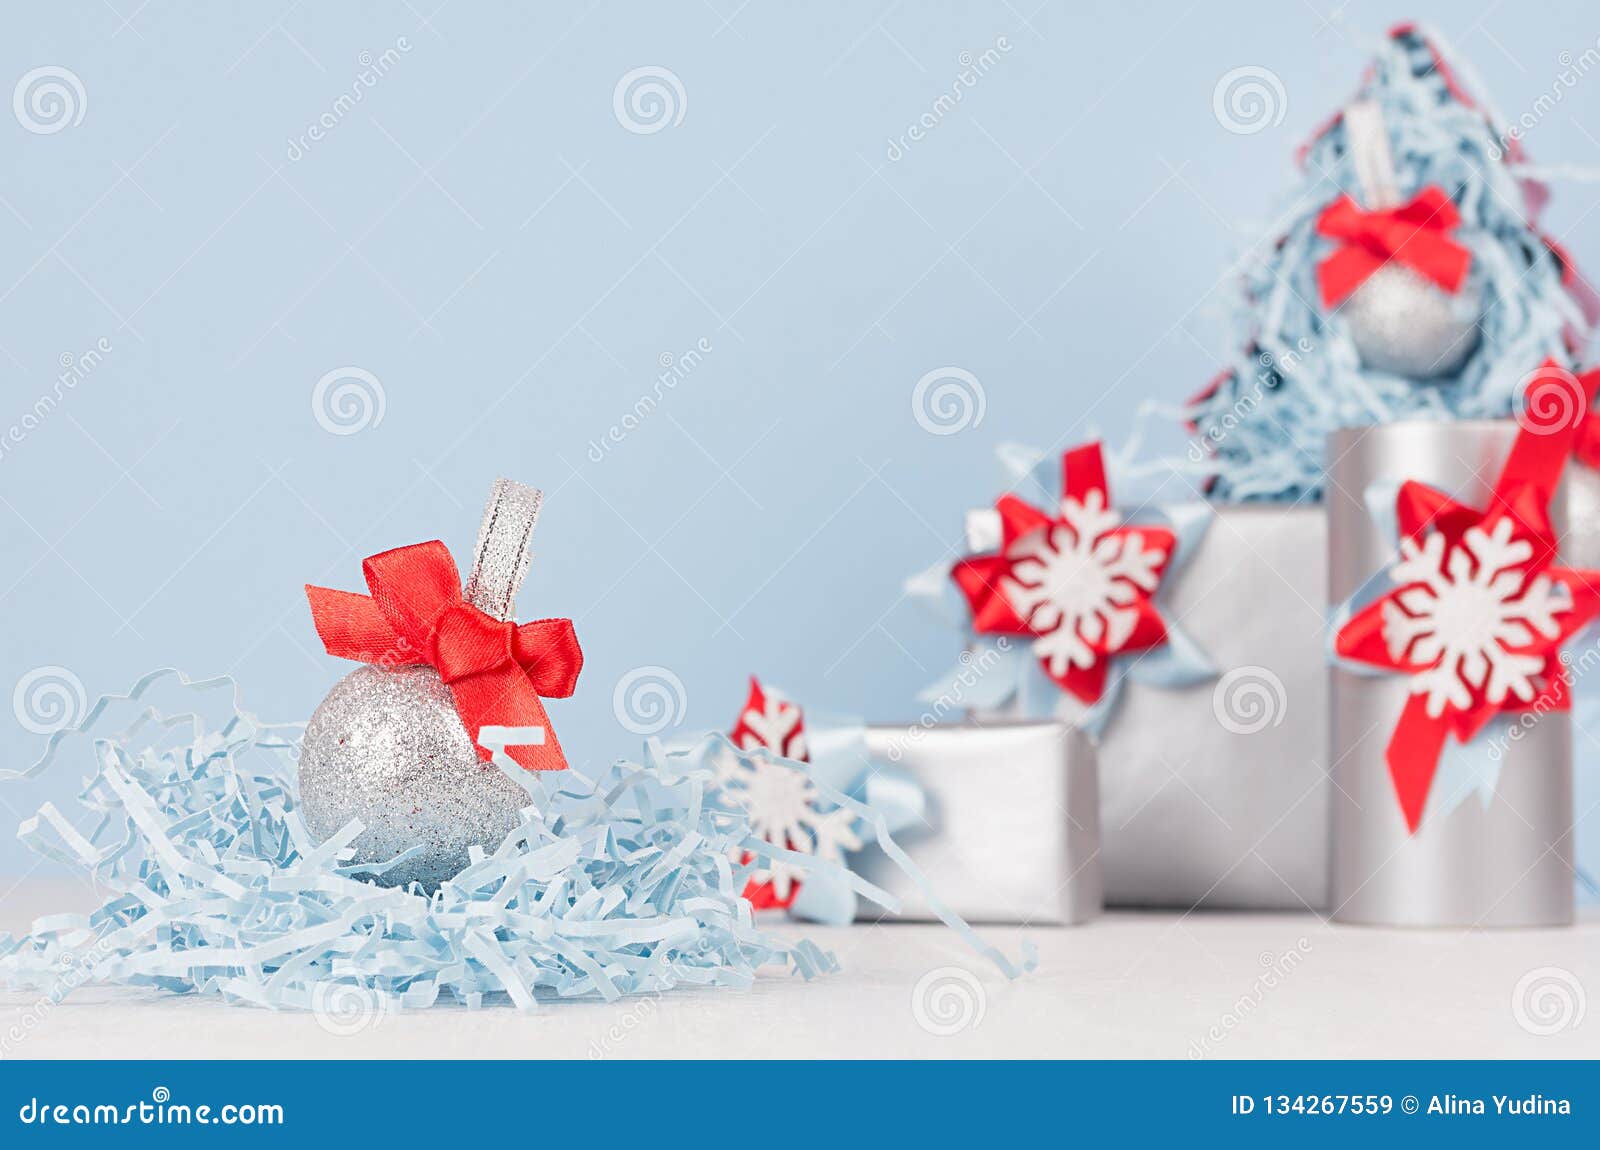 Christmas Home Decor In Pastel Blue And Red Color